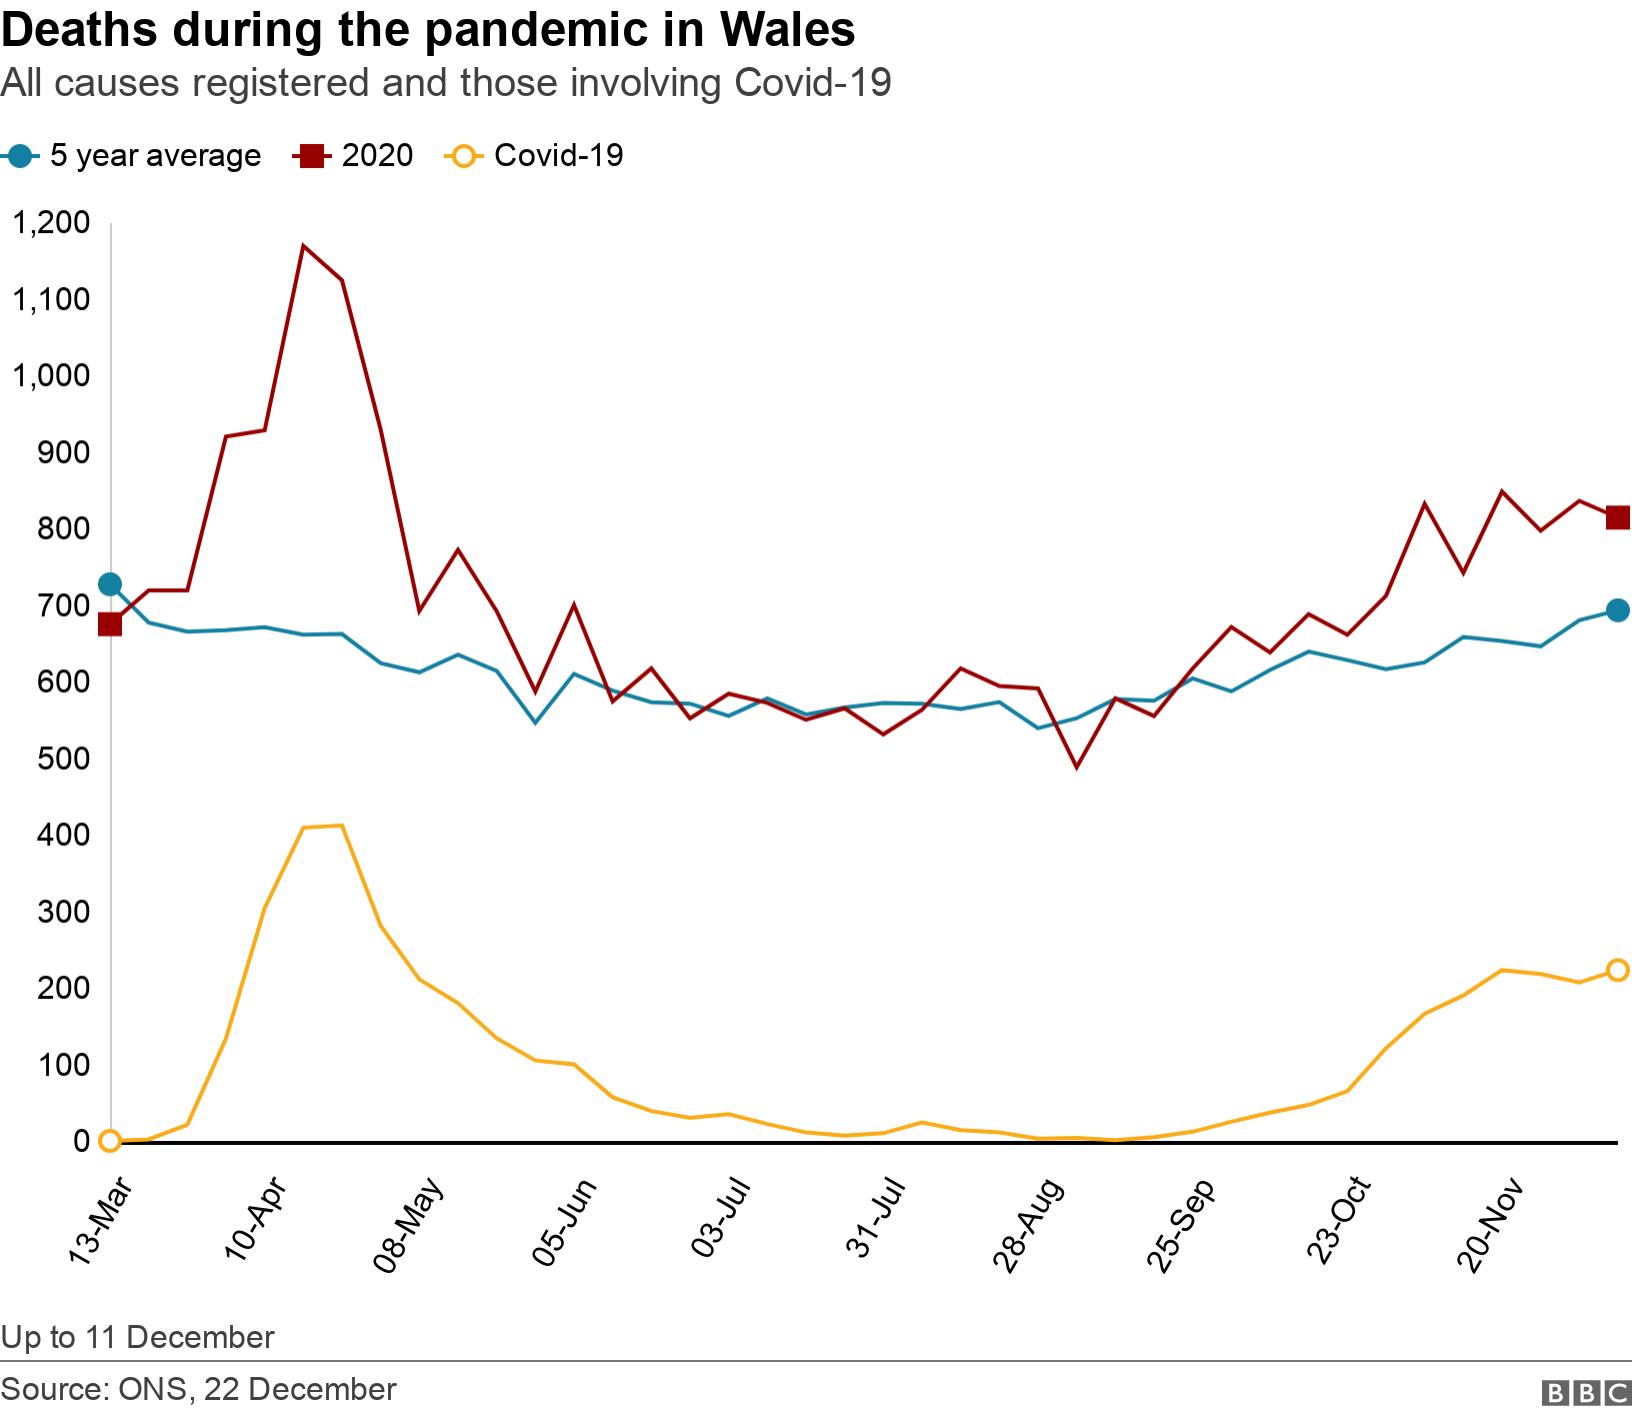 Deaths during the pandemic in Wales. All causes registered and those involving Covid-19. Up to 11 December.